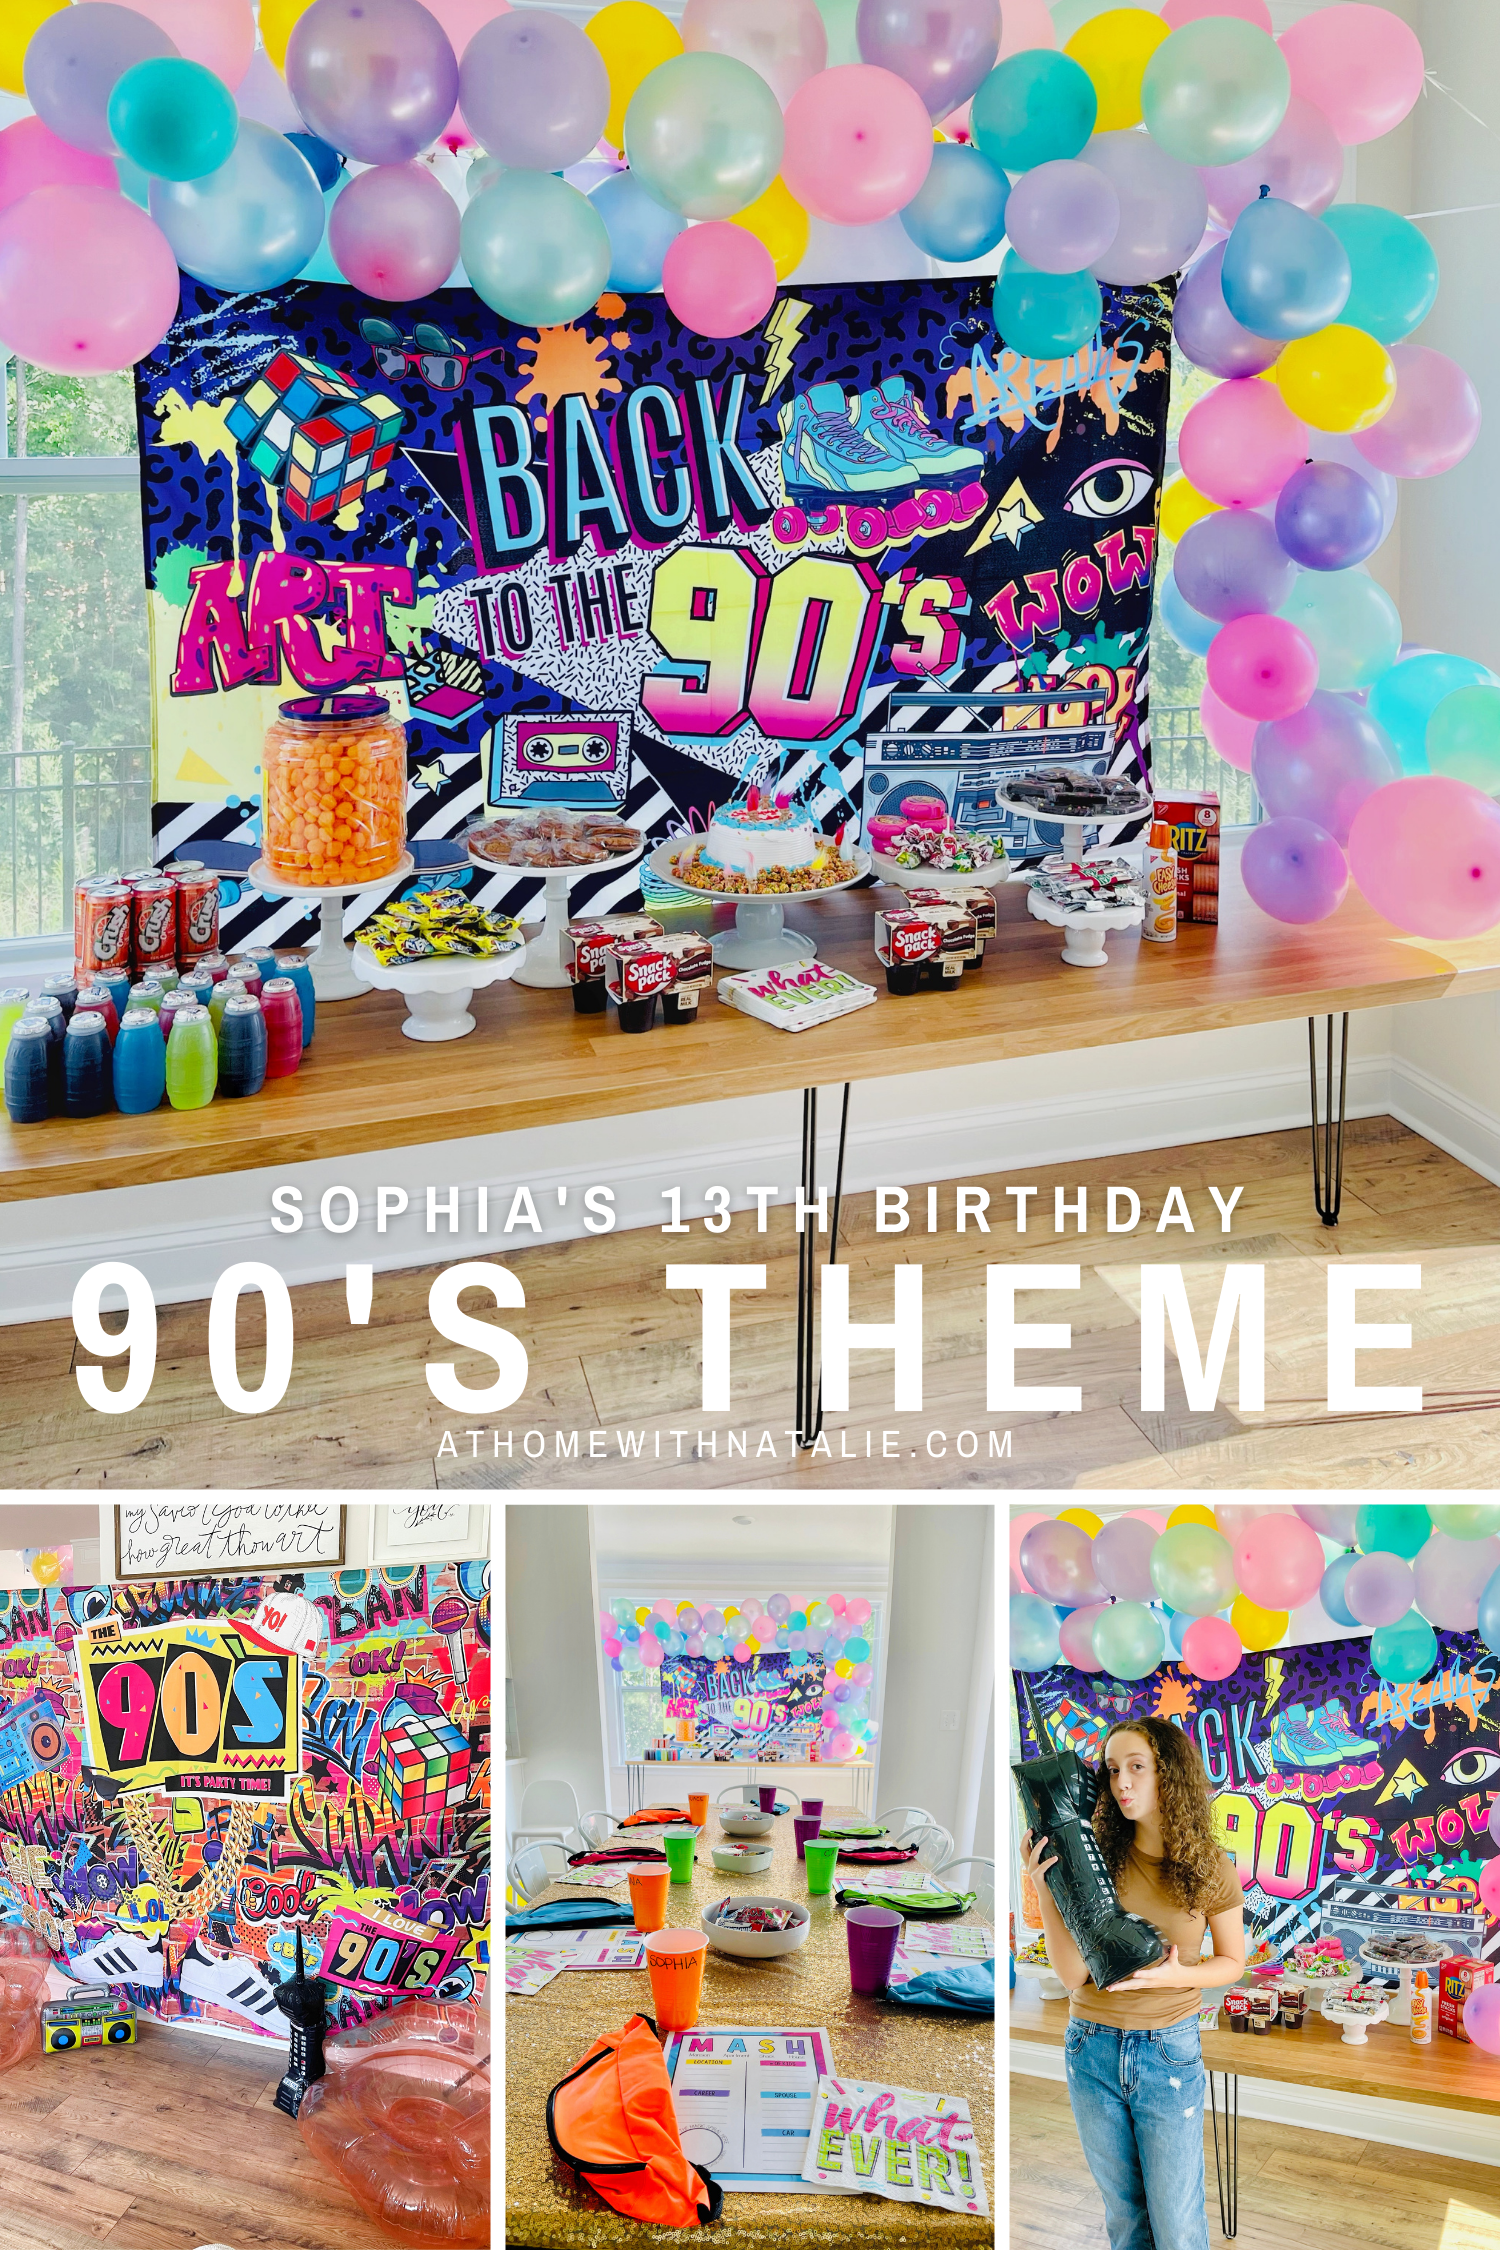 Sophia's 13th Birthday Party – 90's Theme! – At Home With Natalie